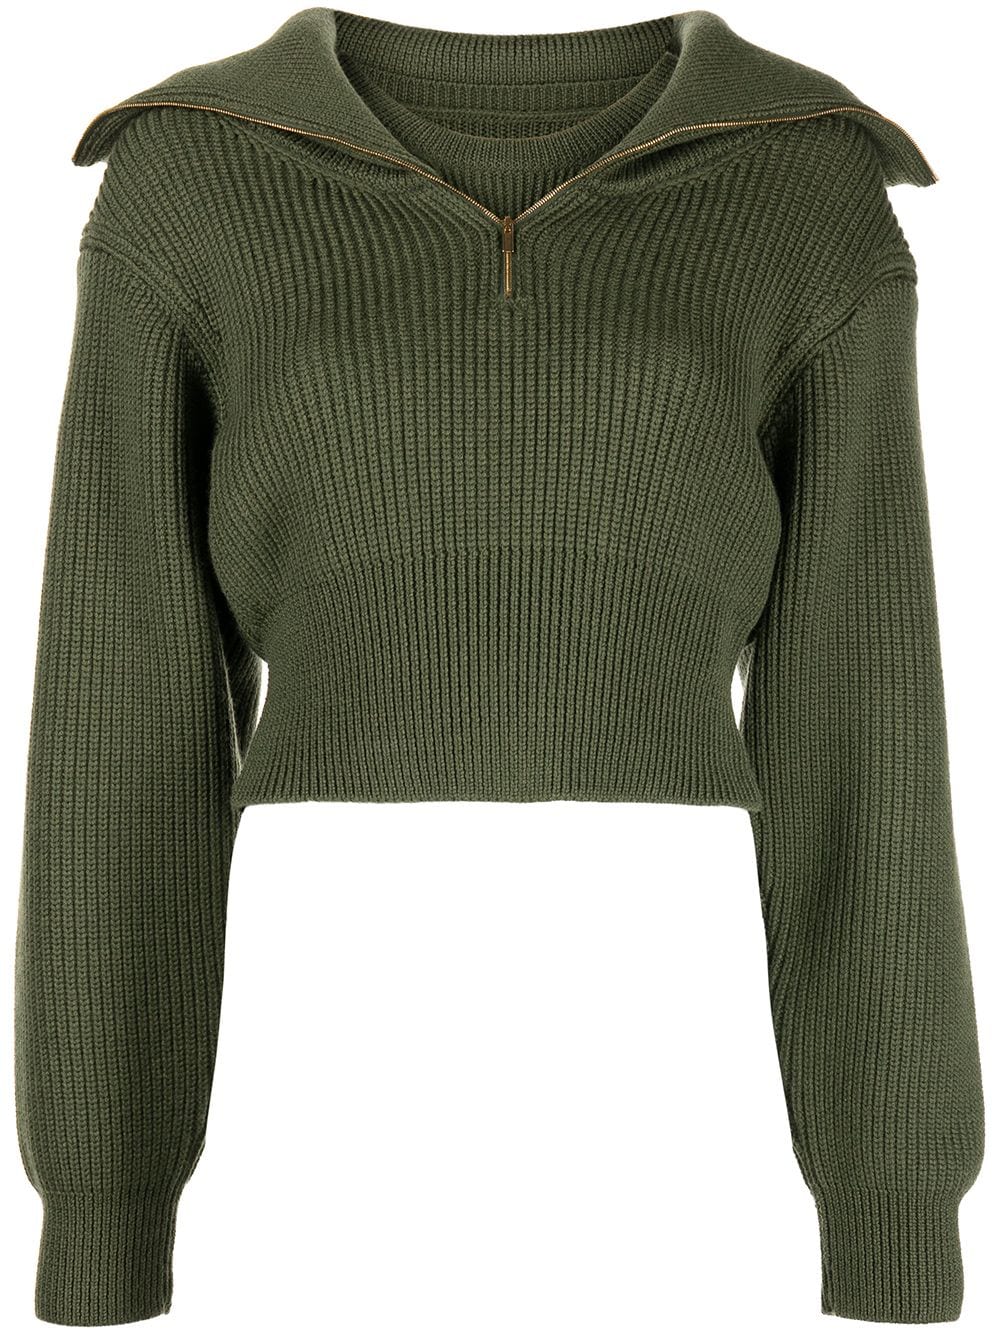 Shop Jacquemus La maille Risoul trucker jumper with Express Delivery ...